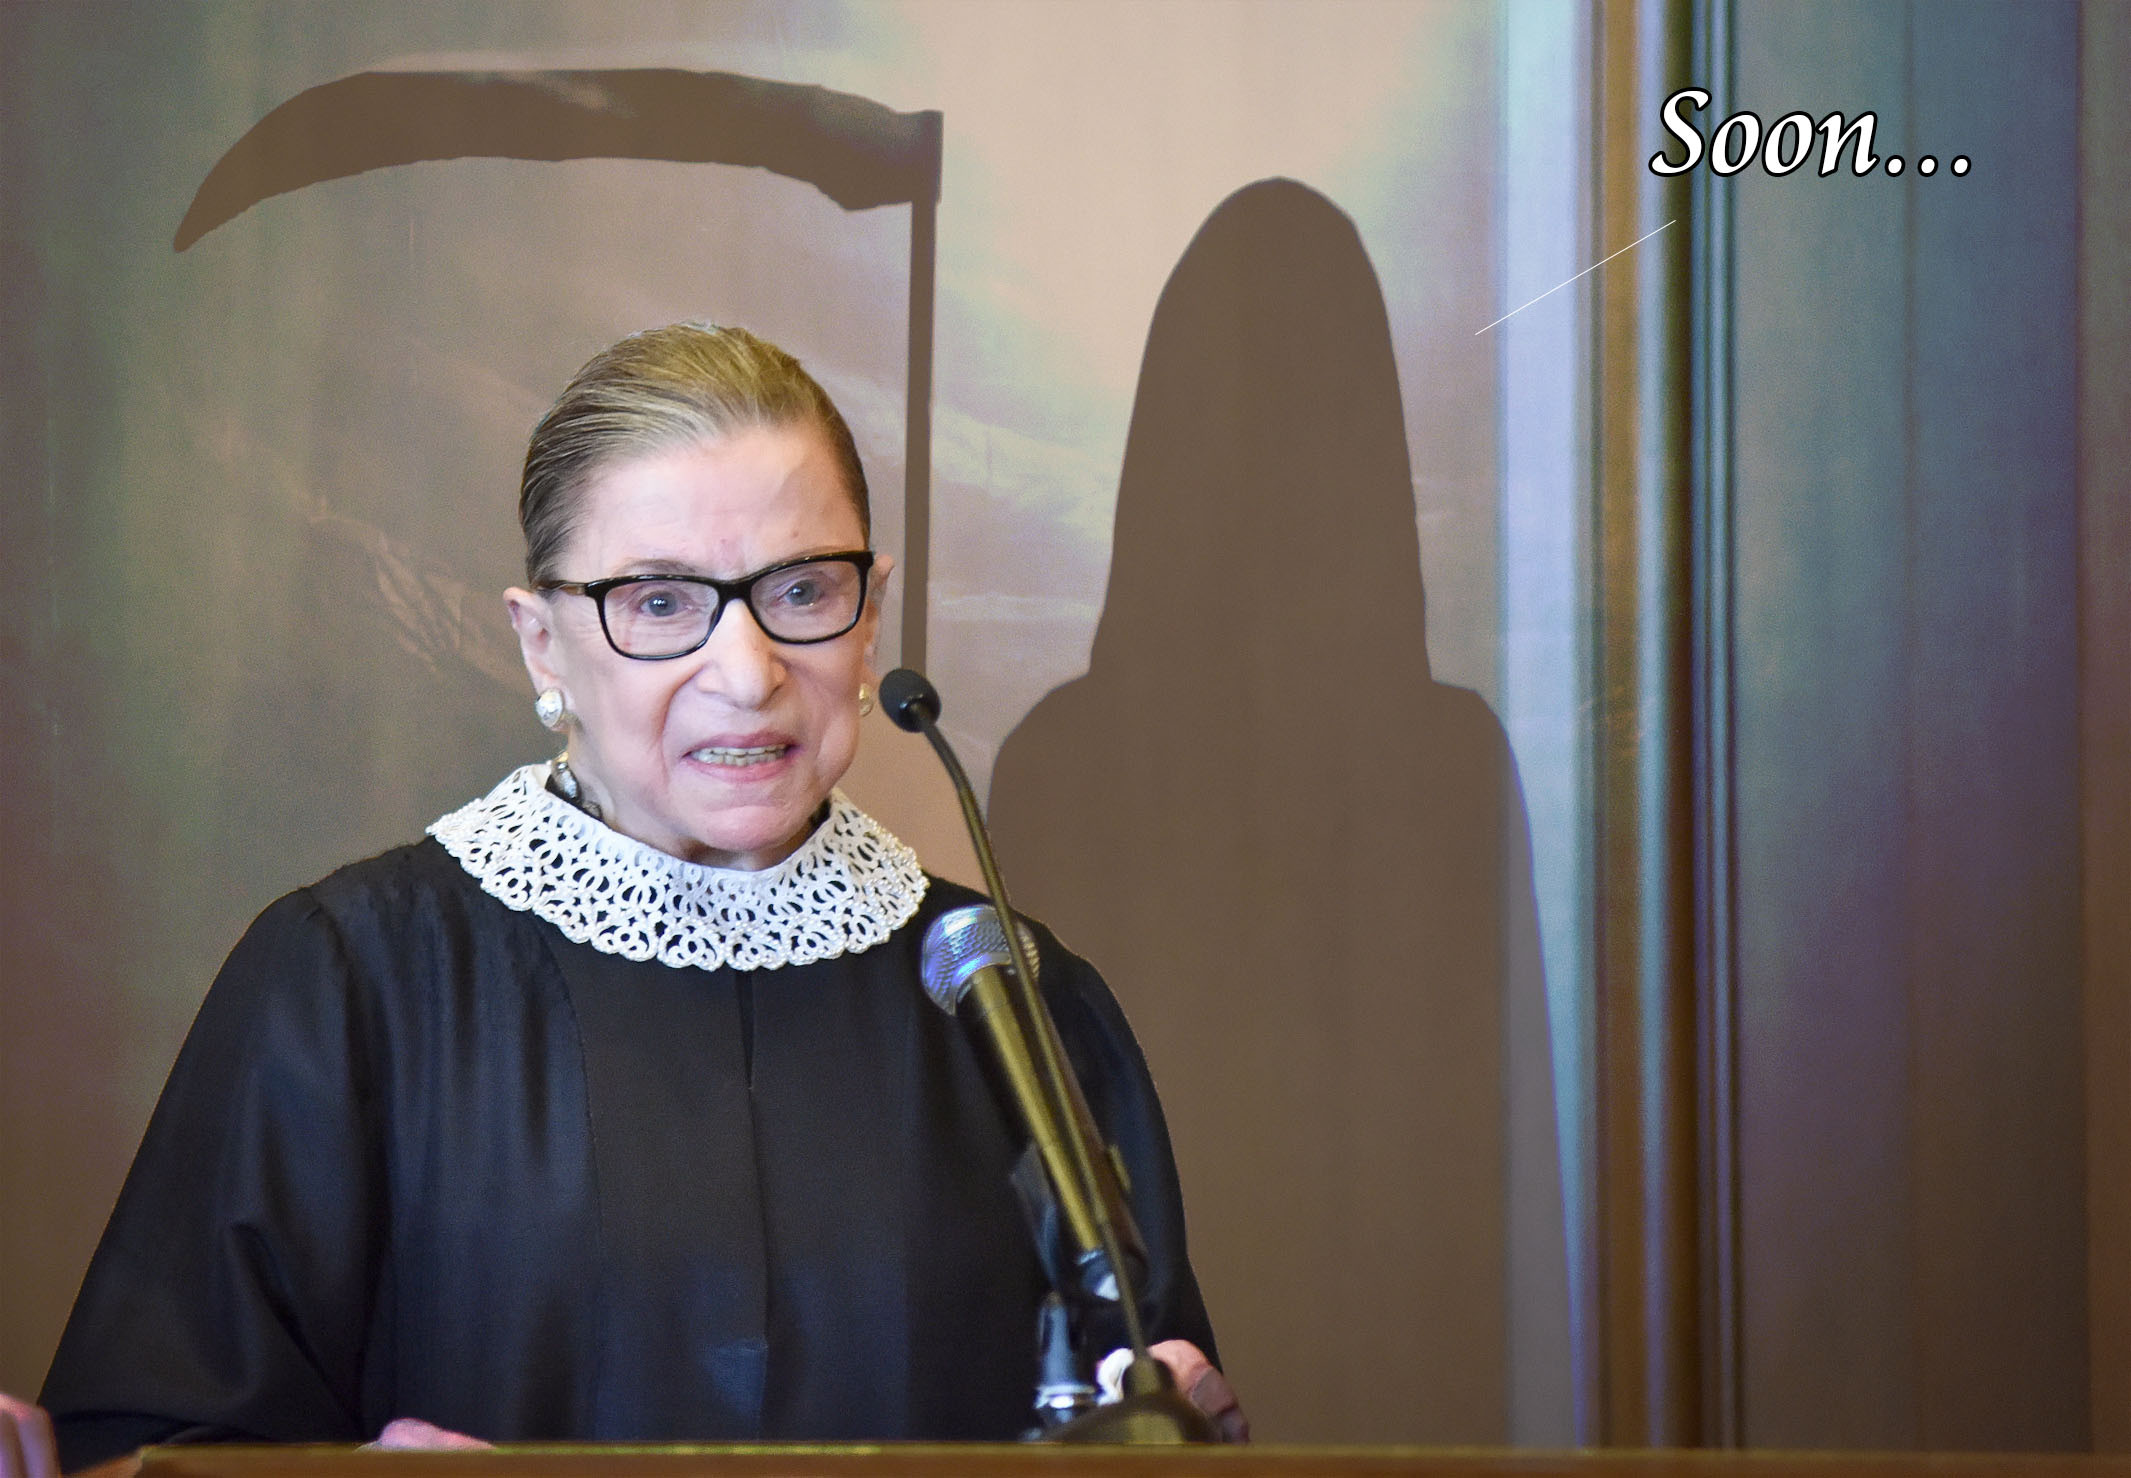 now ruth bader ginsburg dead - Soon...